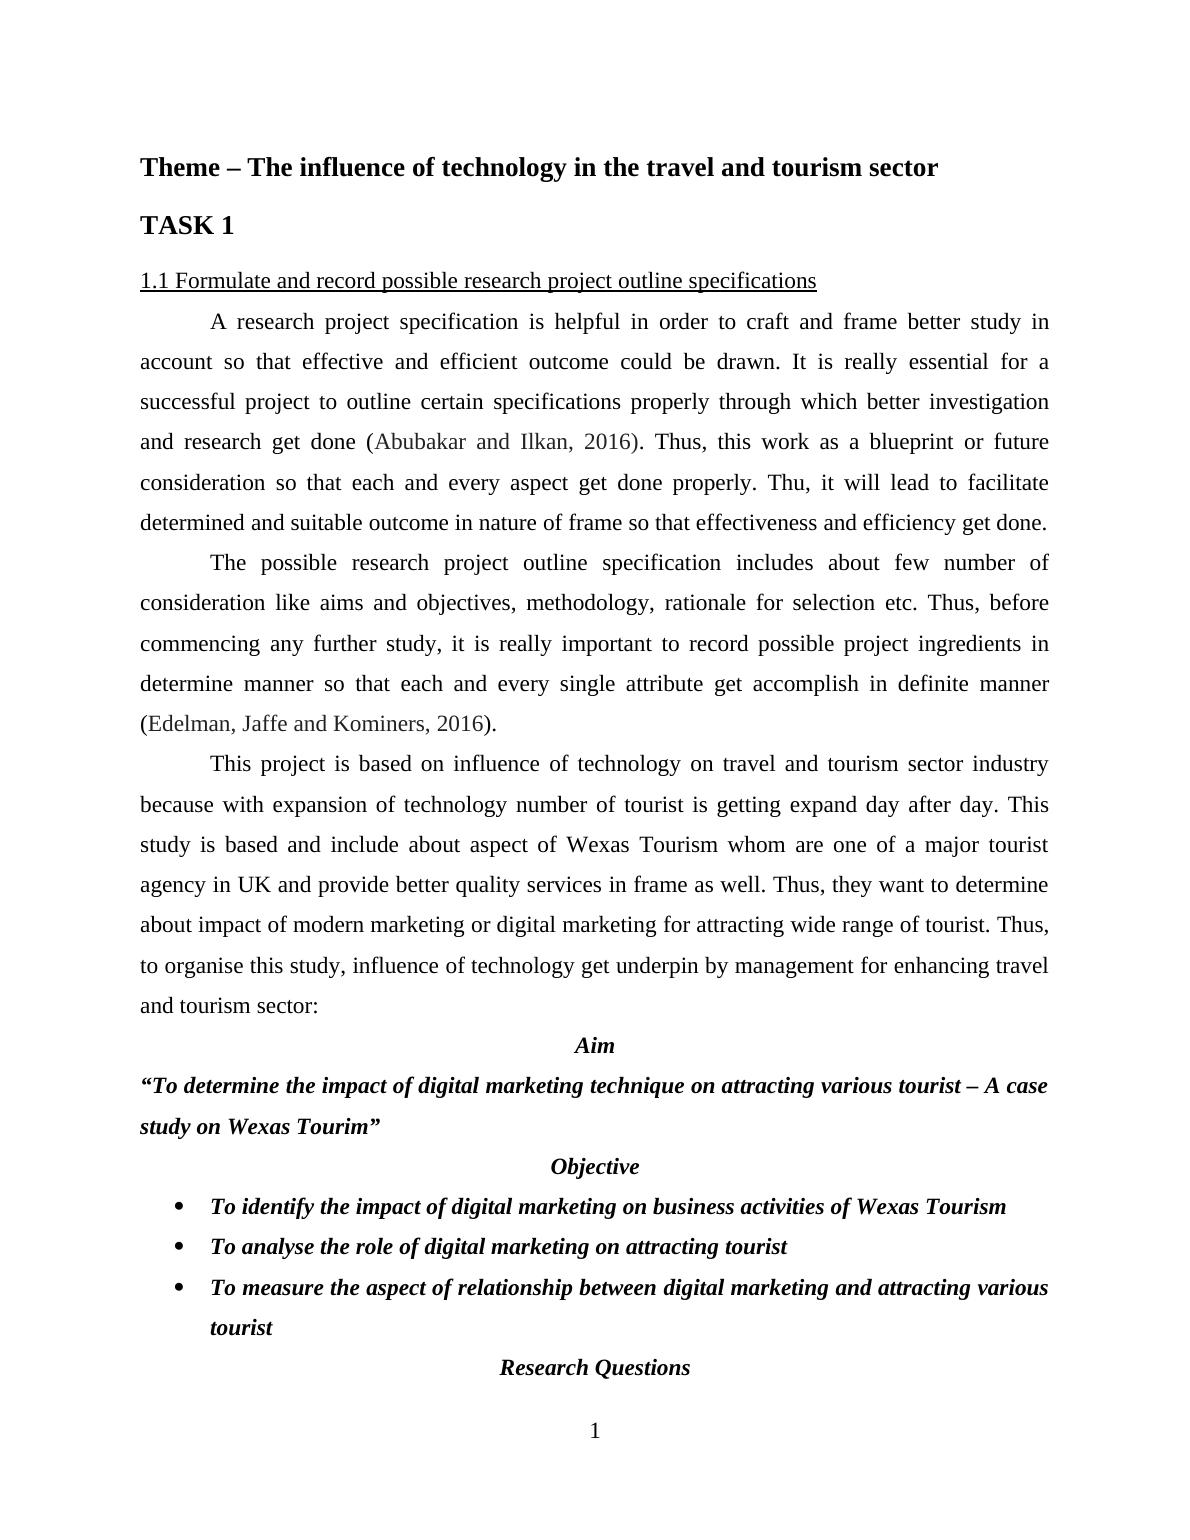 Technology in Travel and Tourism Sector : Research Project_4